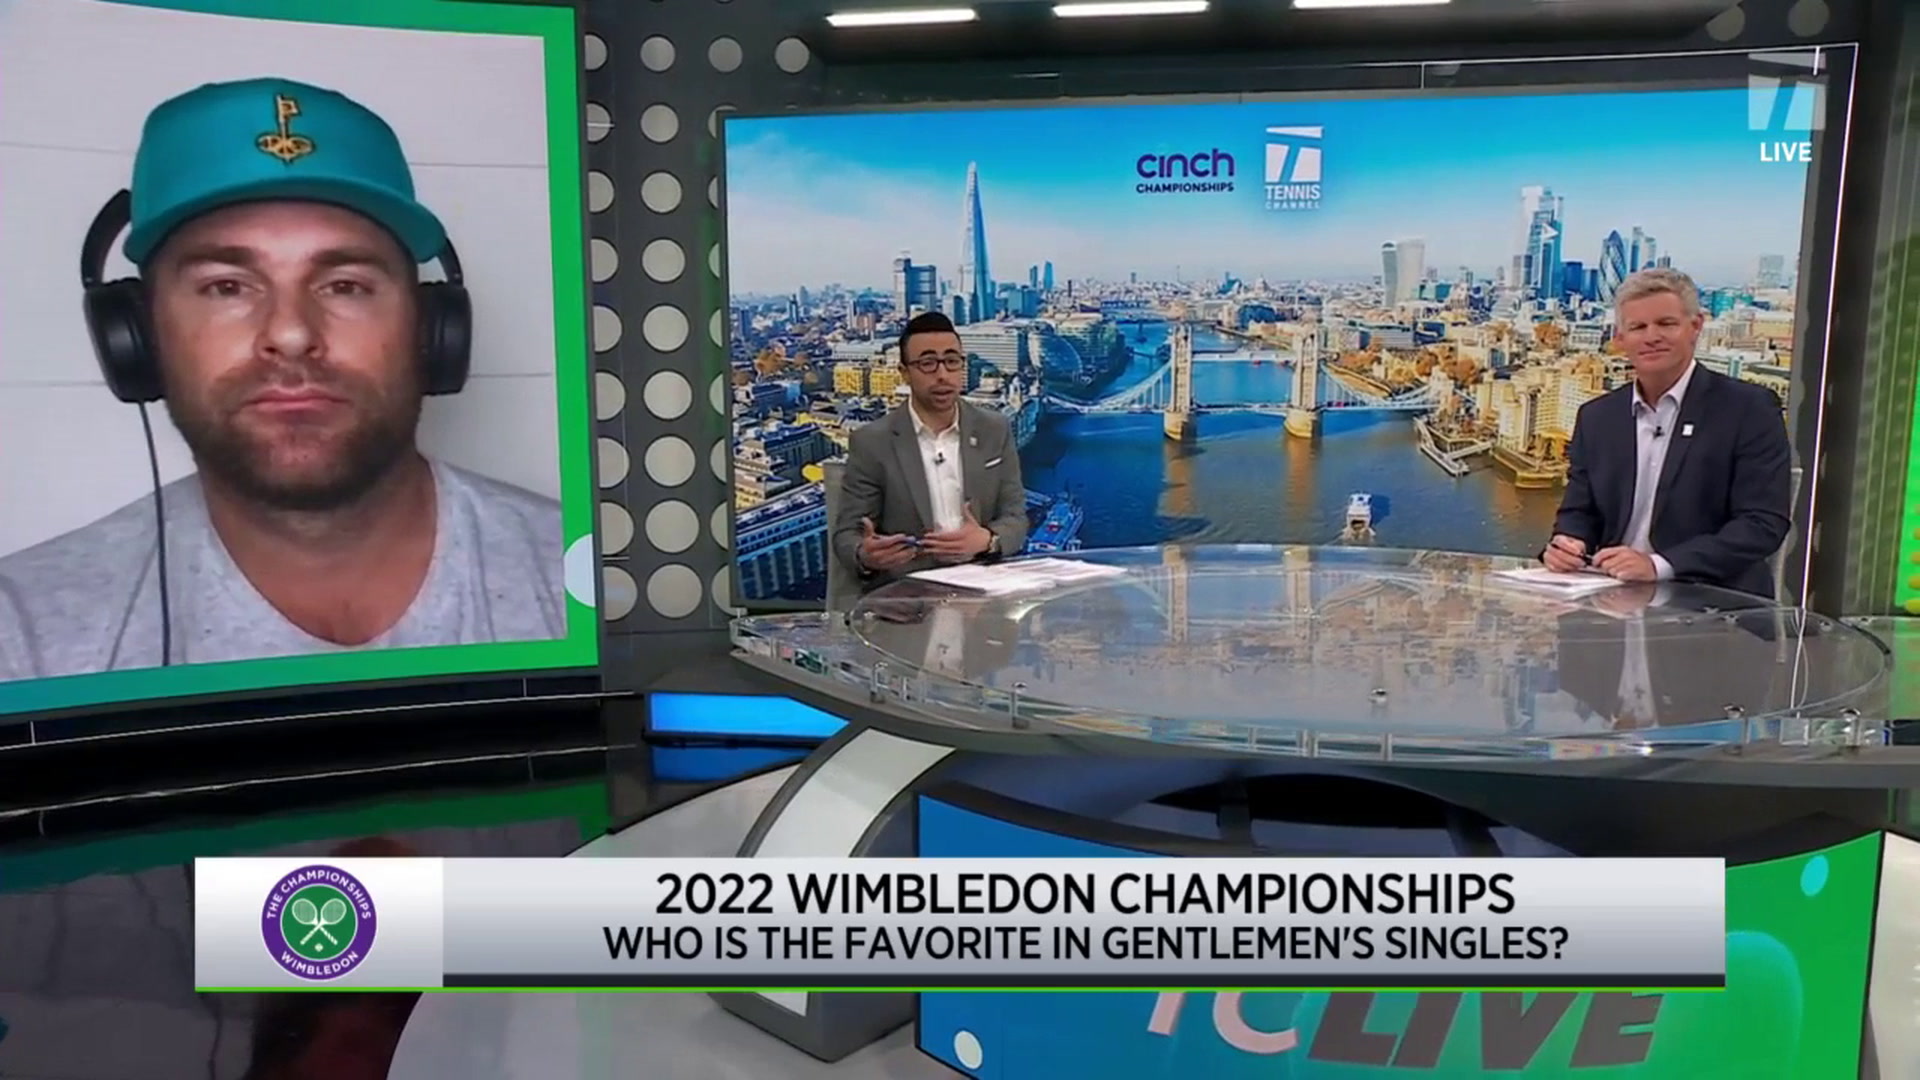 Tennis Channel Live Who is the favorite at Wimbledon? Tennis